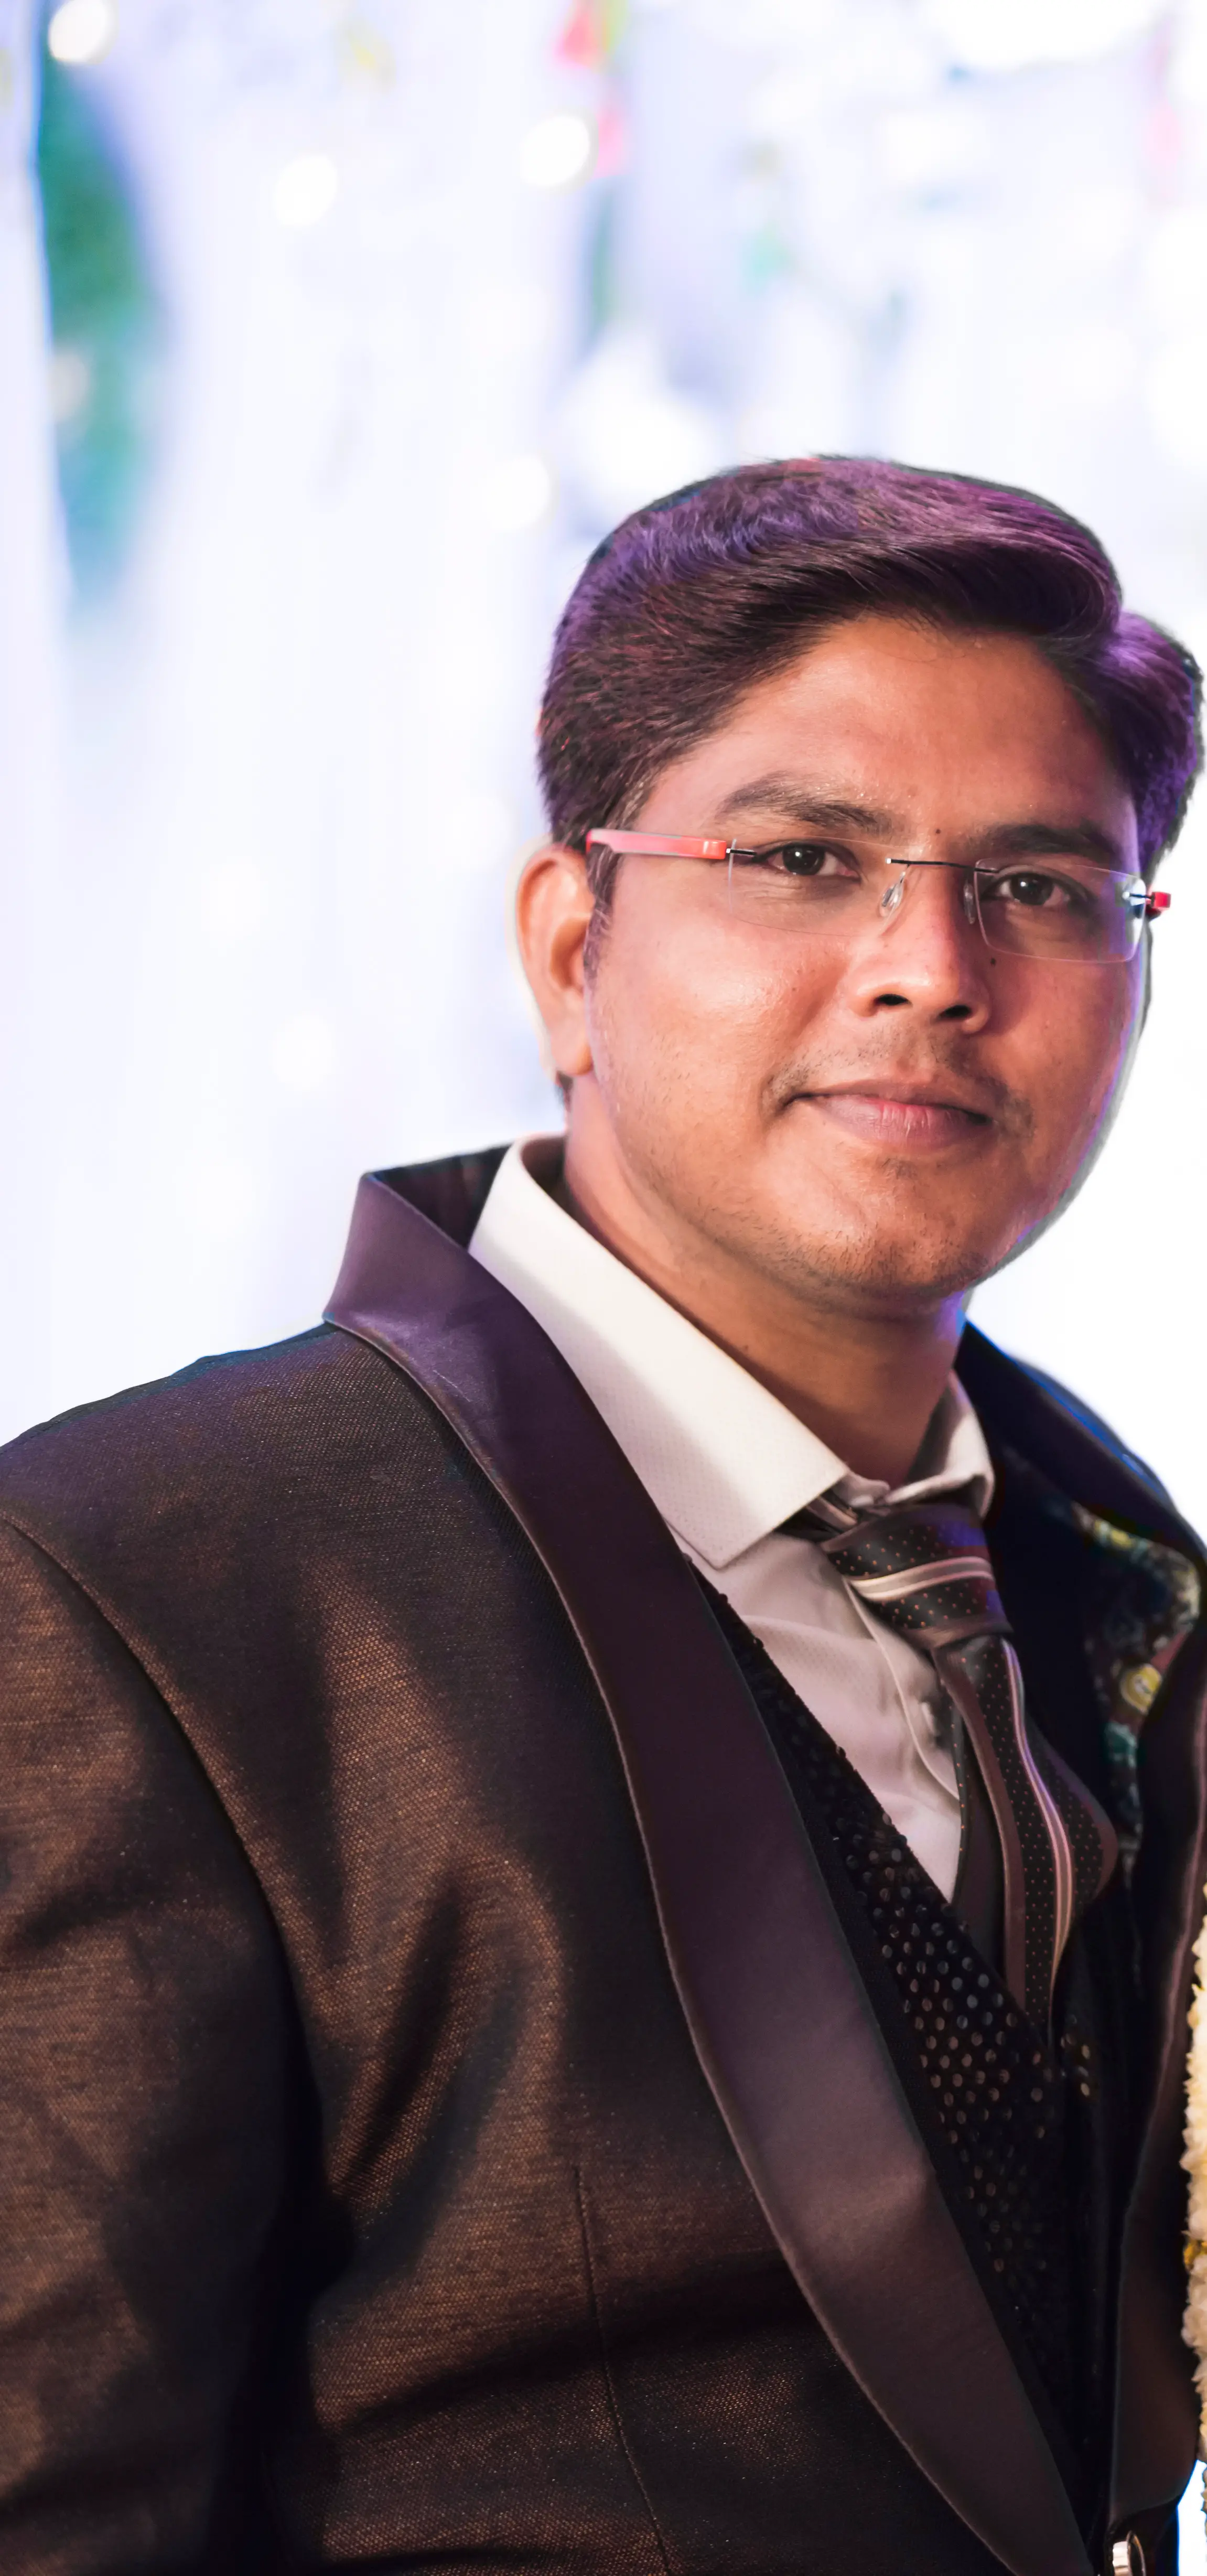 Vinod Girija | Founder And CEO At Webdoux